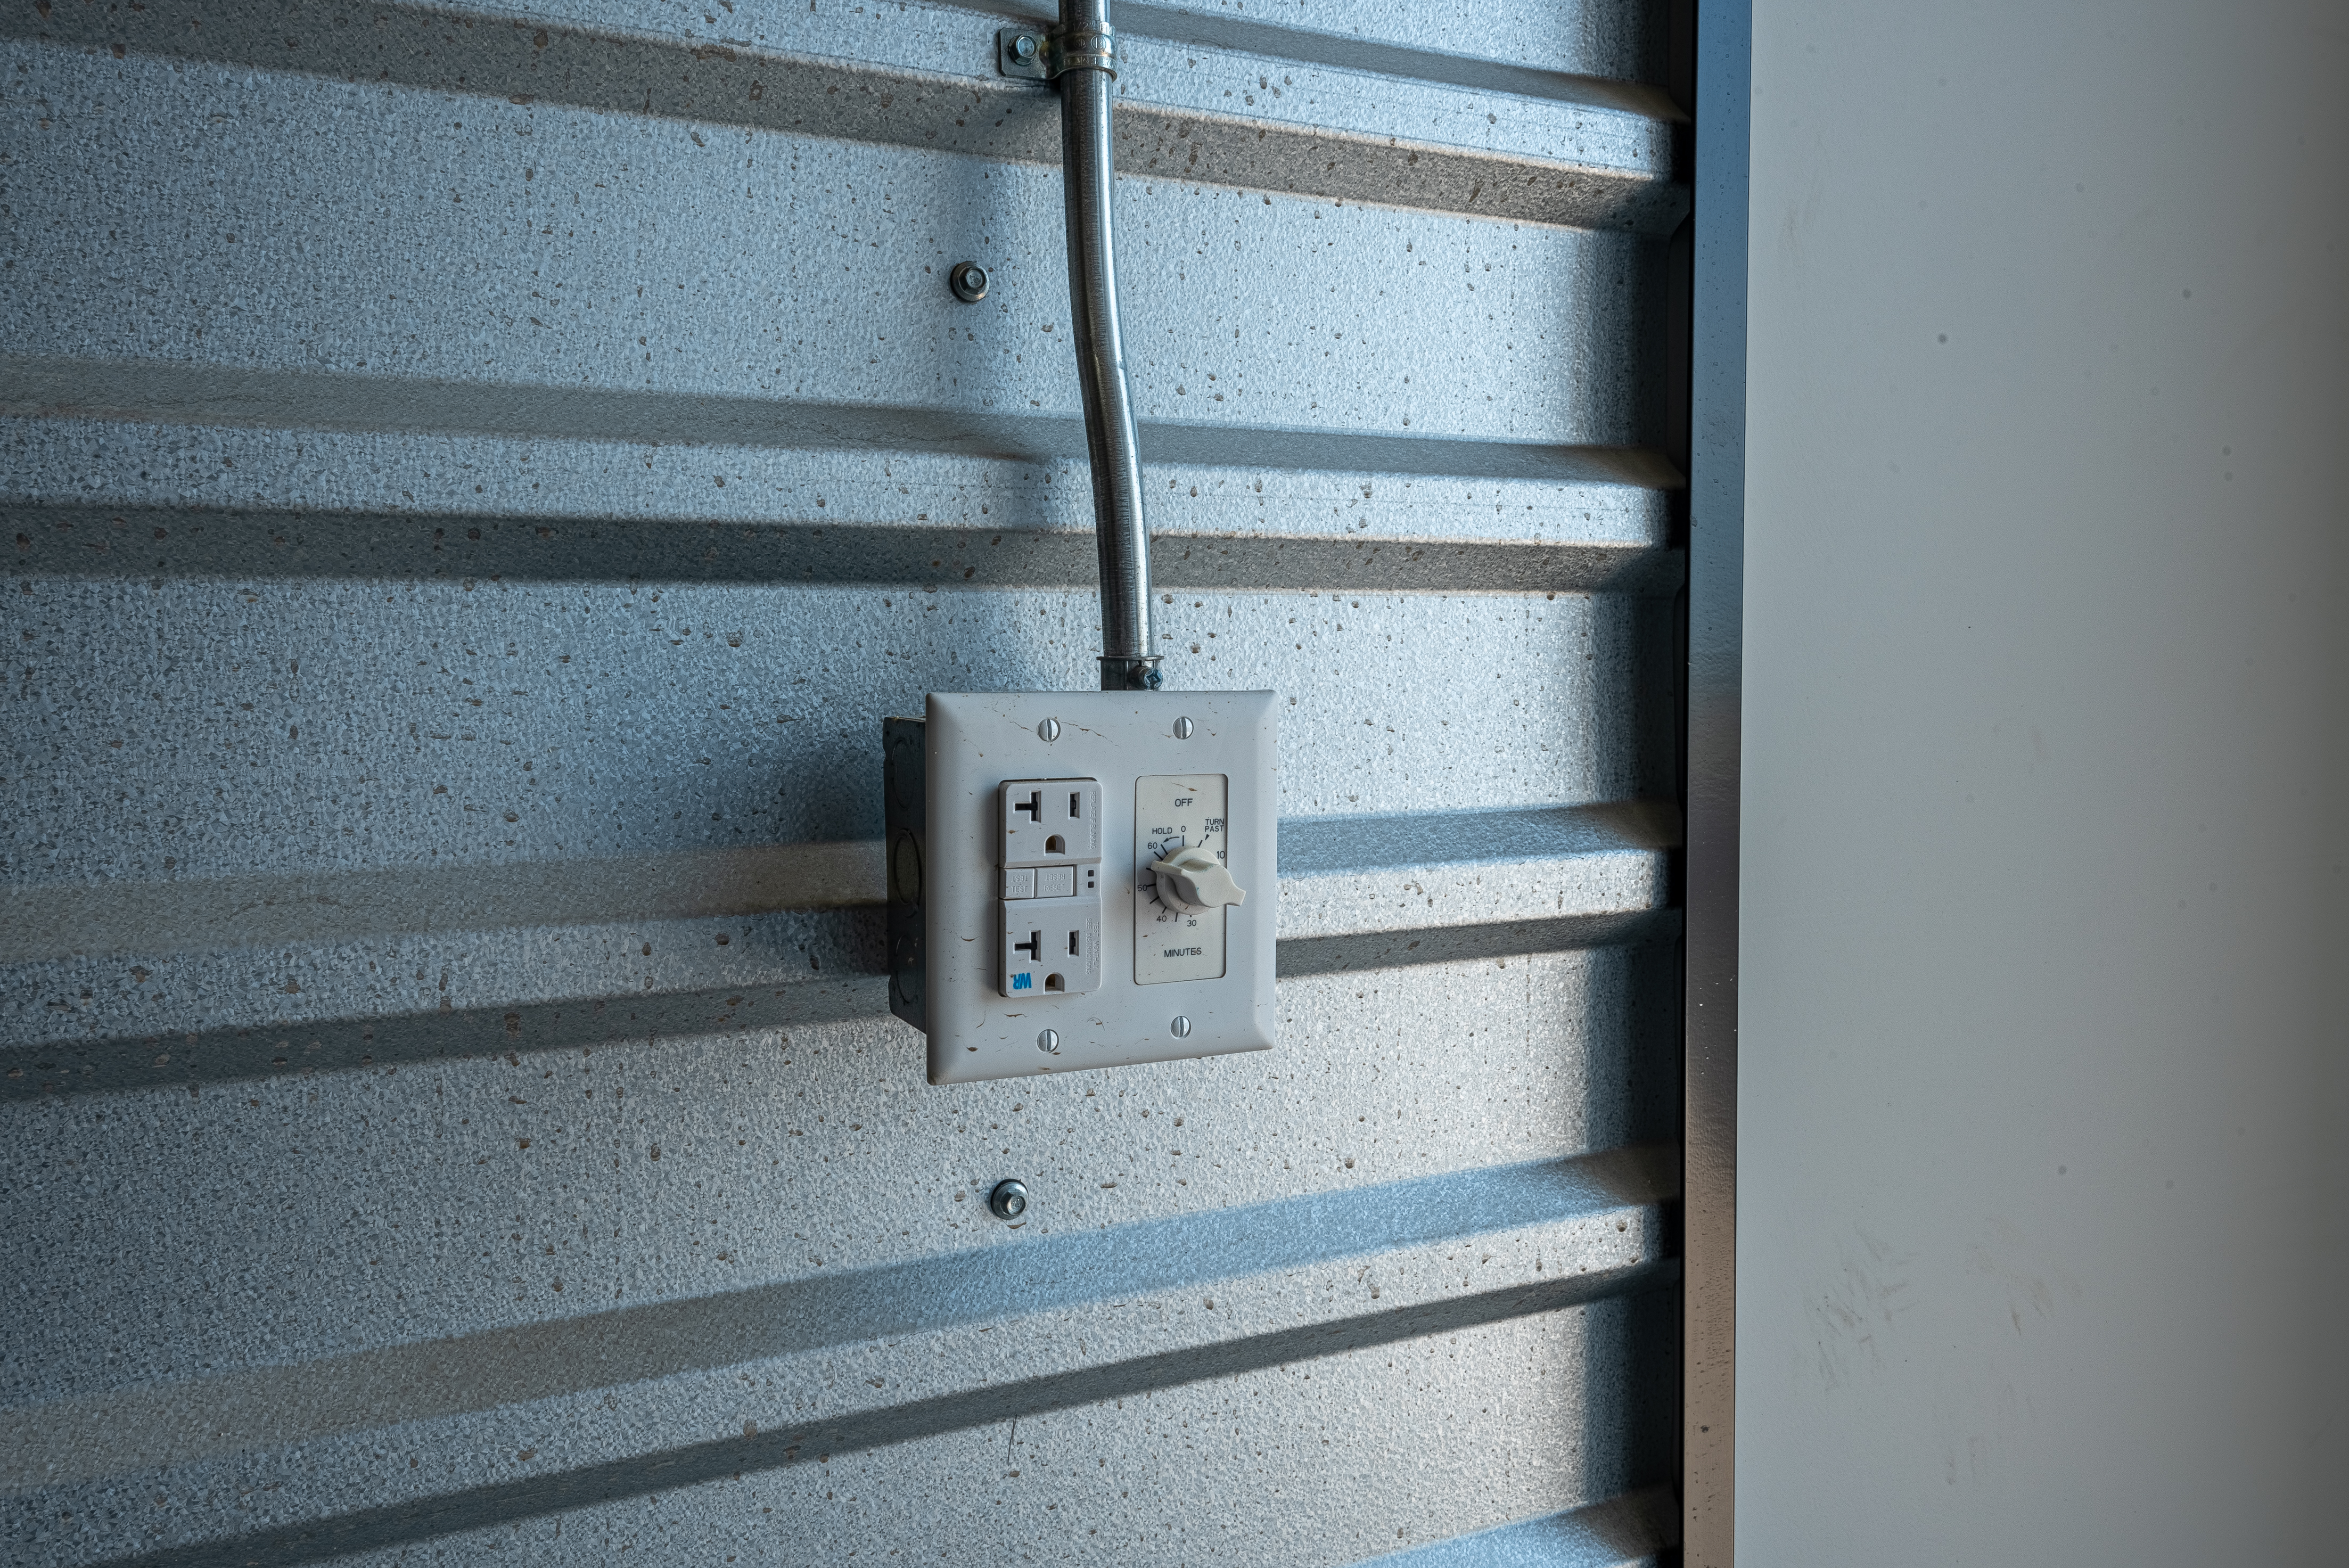 Enclosed Units at Haslet Boat & RV Storage have electricity included through the 120V outlets